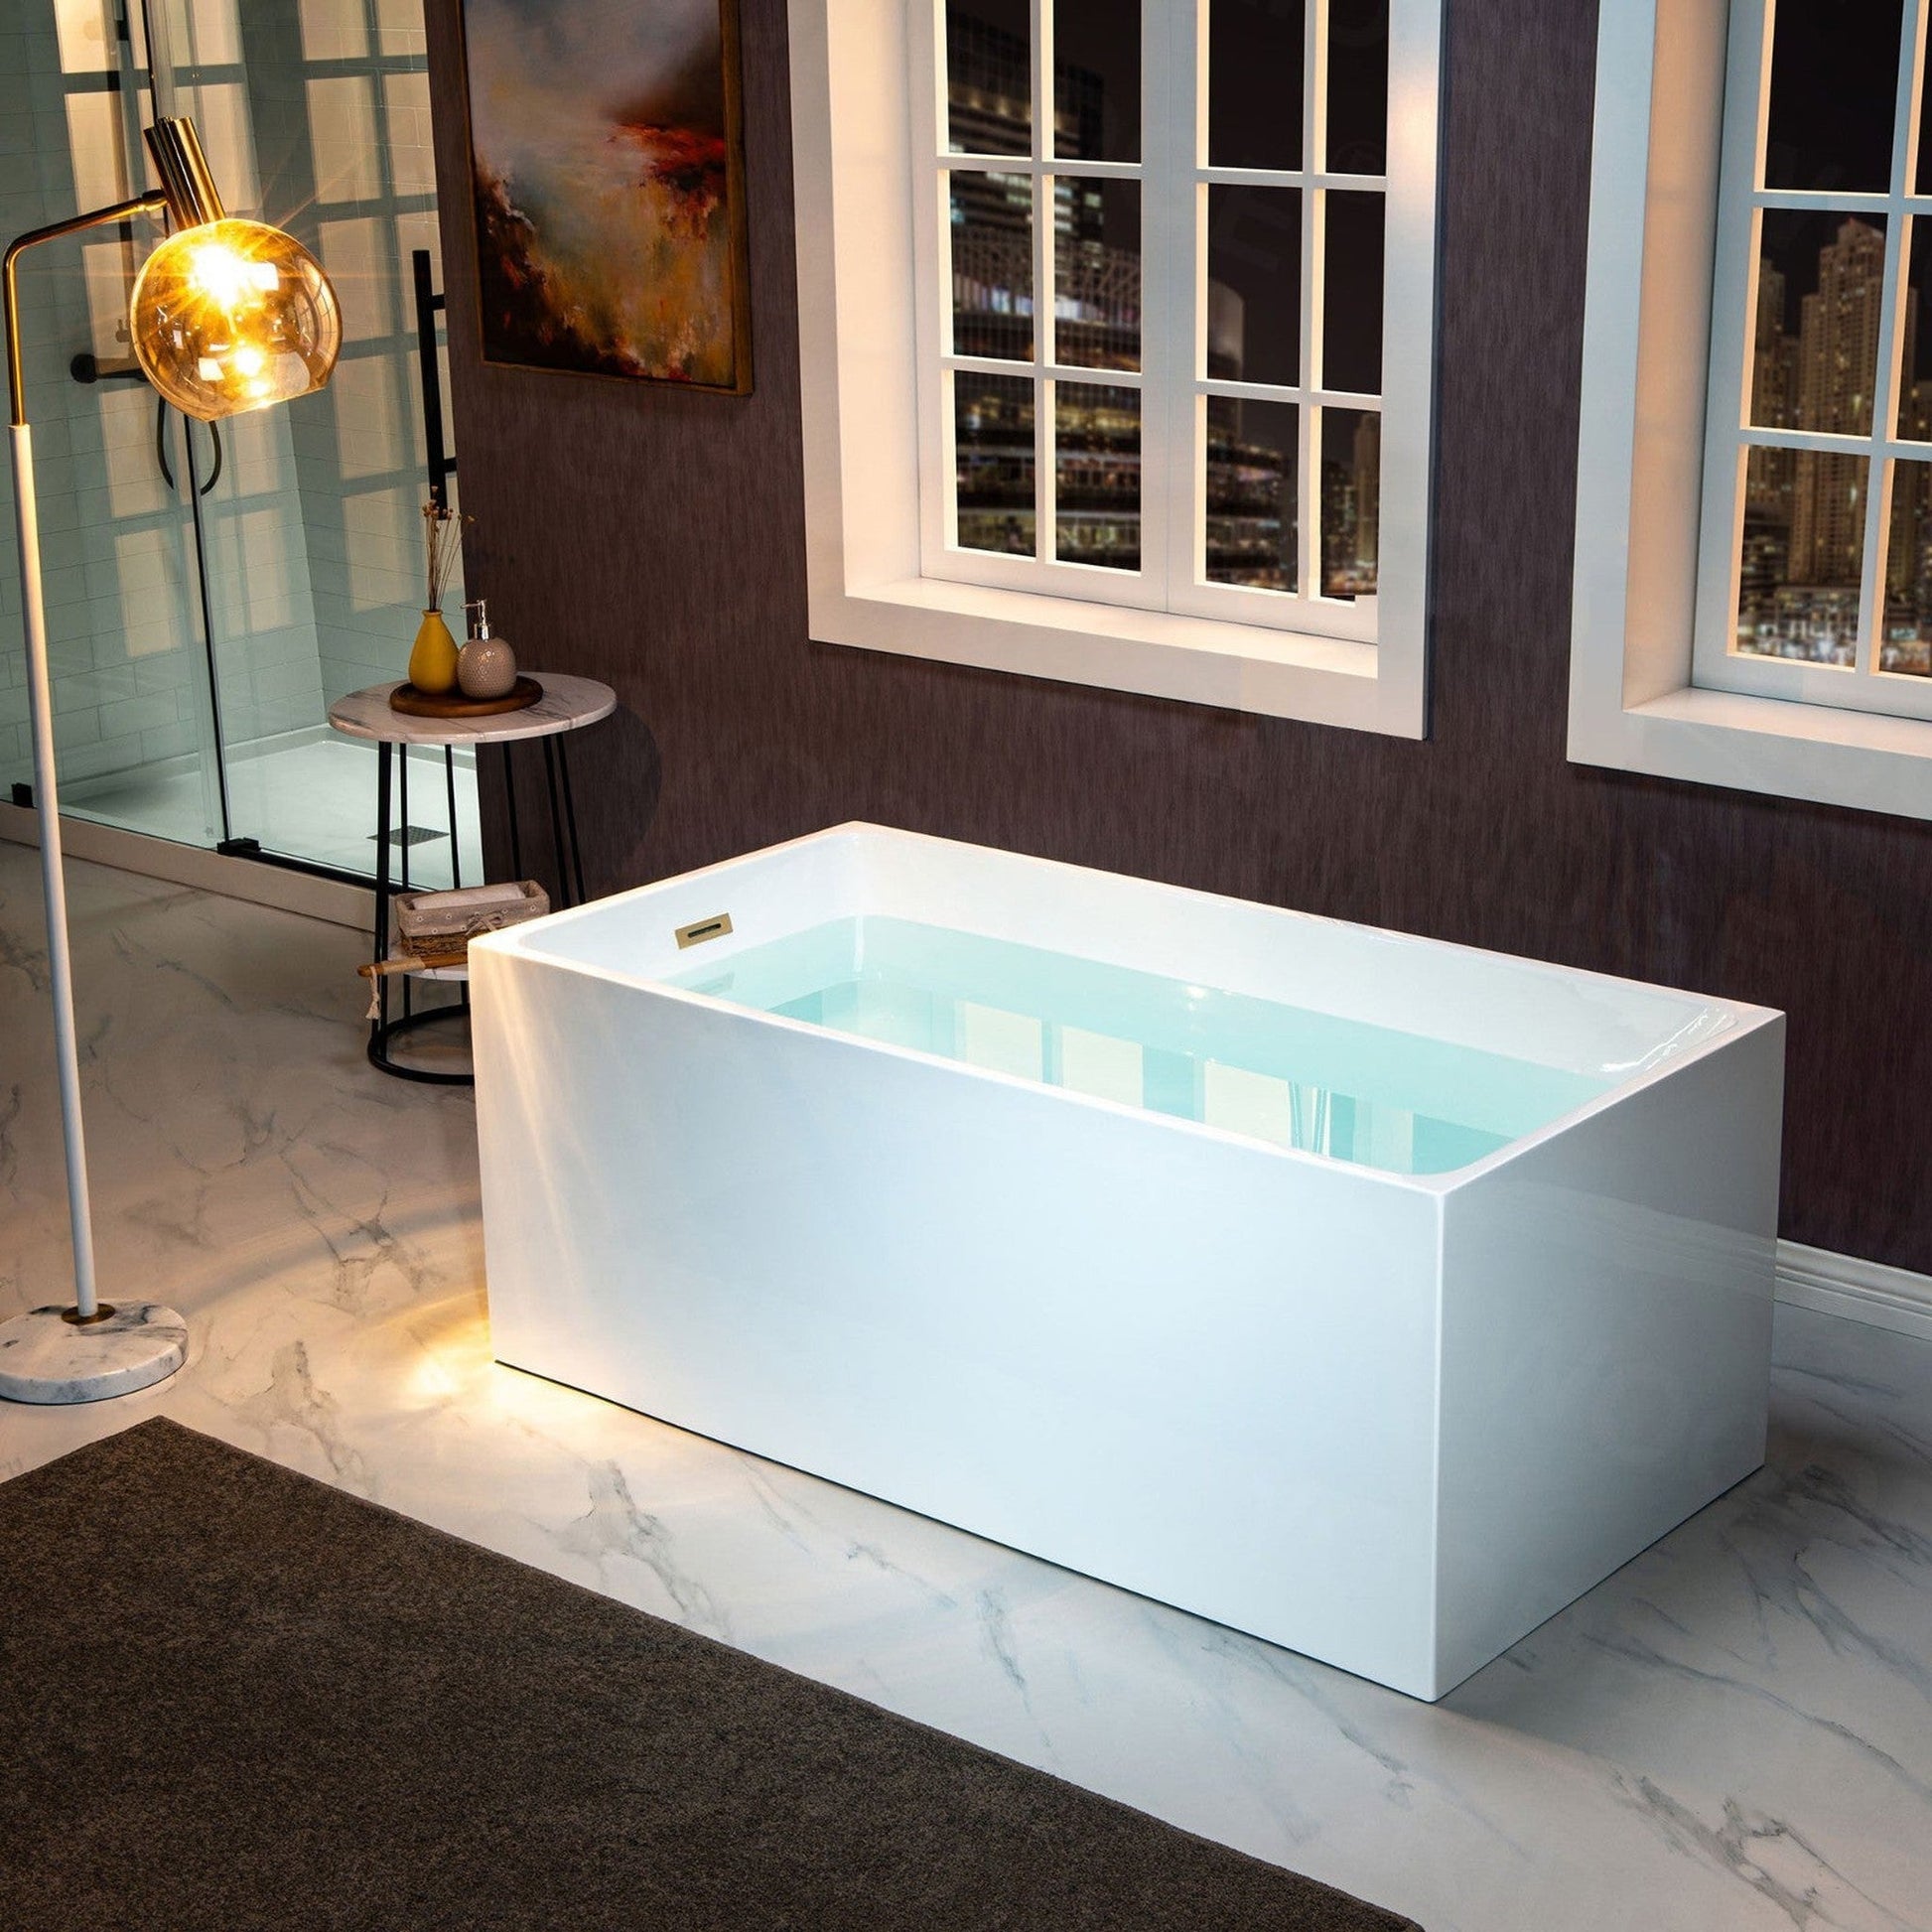 WoodBridge B-0085 59" White Acrylic Freestanding Soaking Bathtub With Brushed Gold Drain, Overflow, F0073BGVT Tub Filler and Caddy Tray